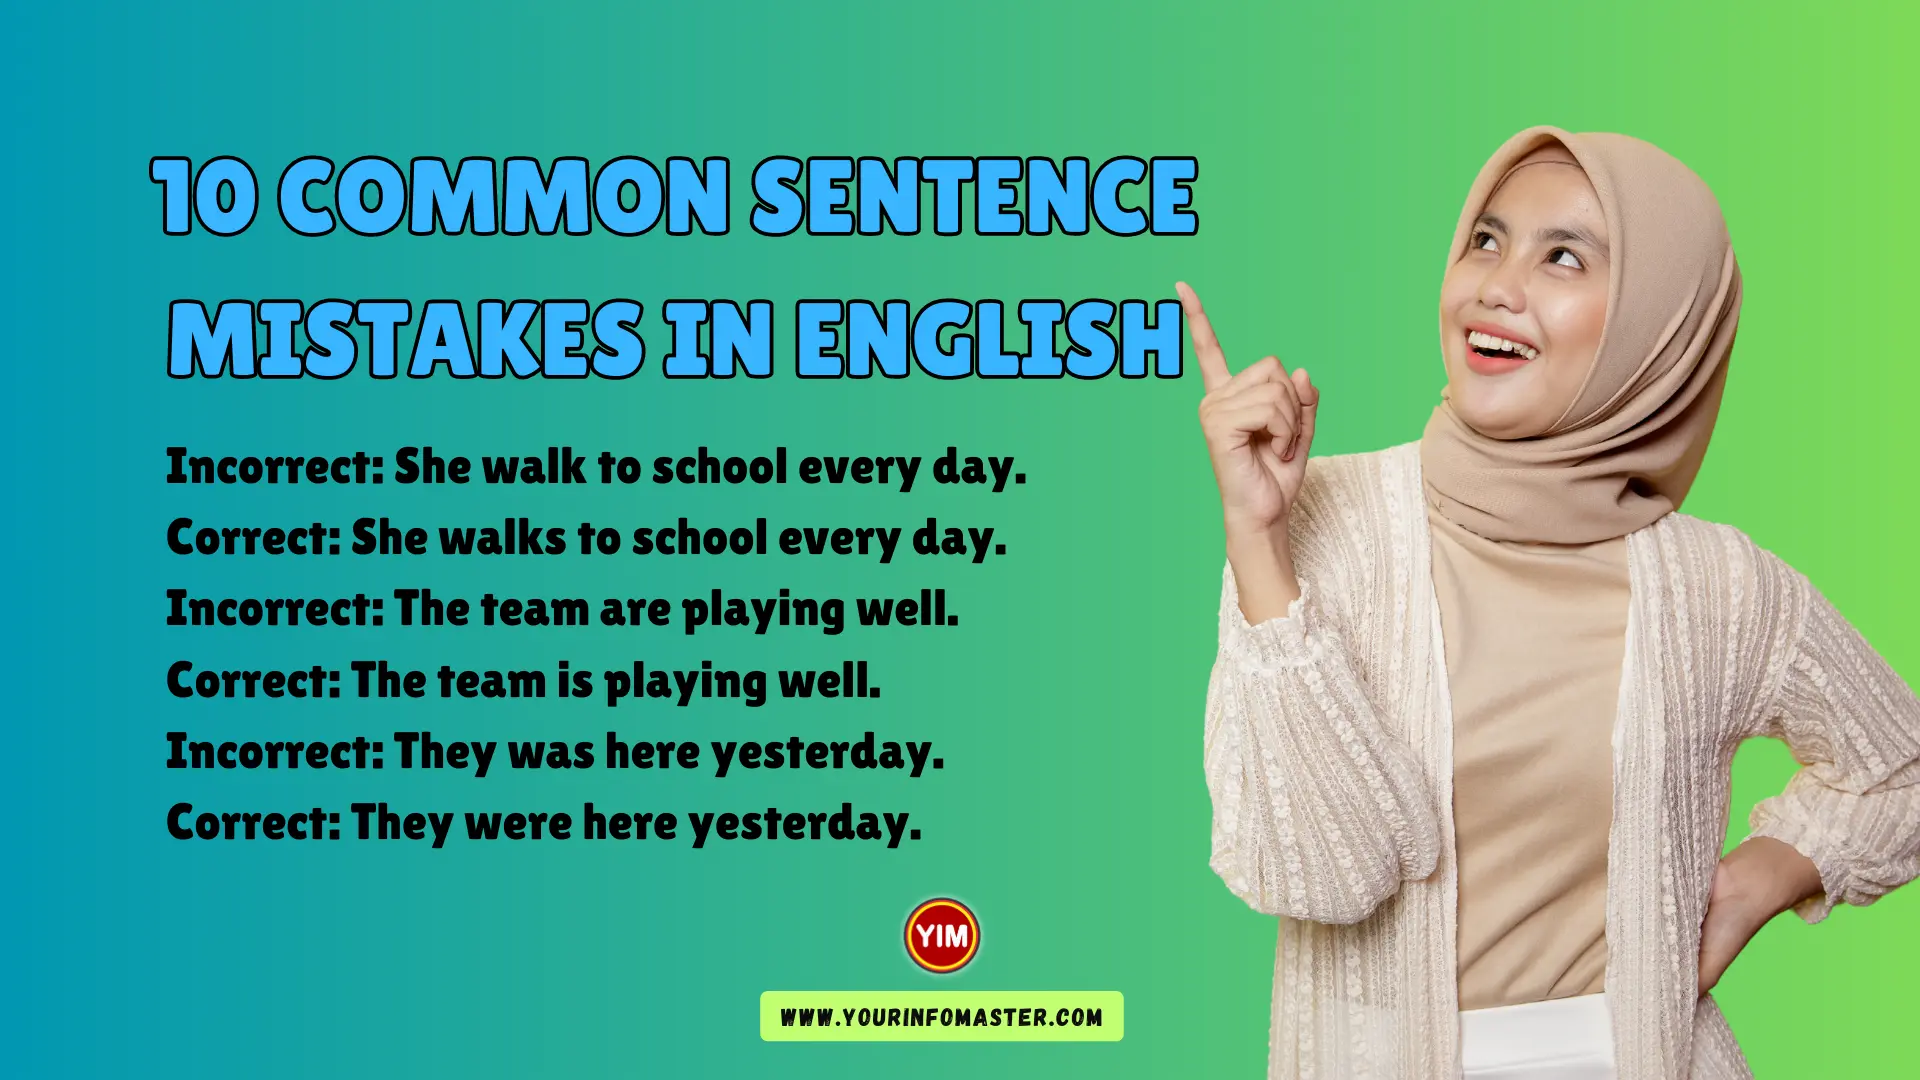 10 Common Sentence Mistakes in English